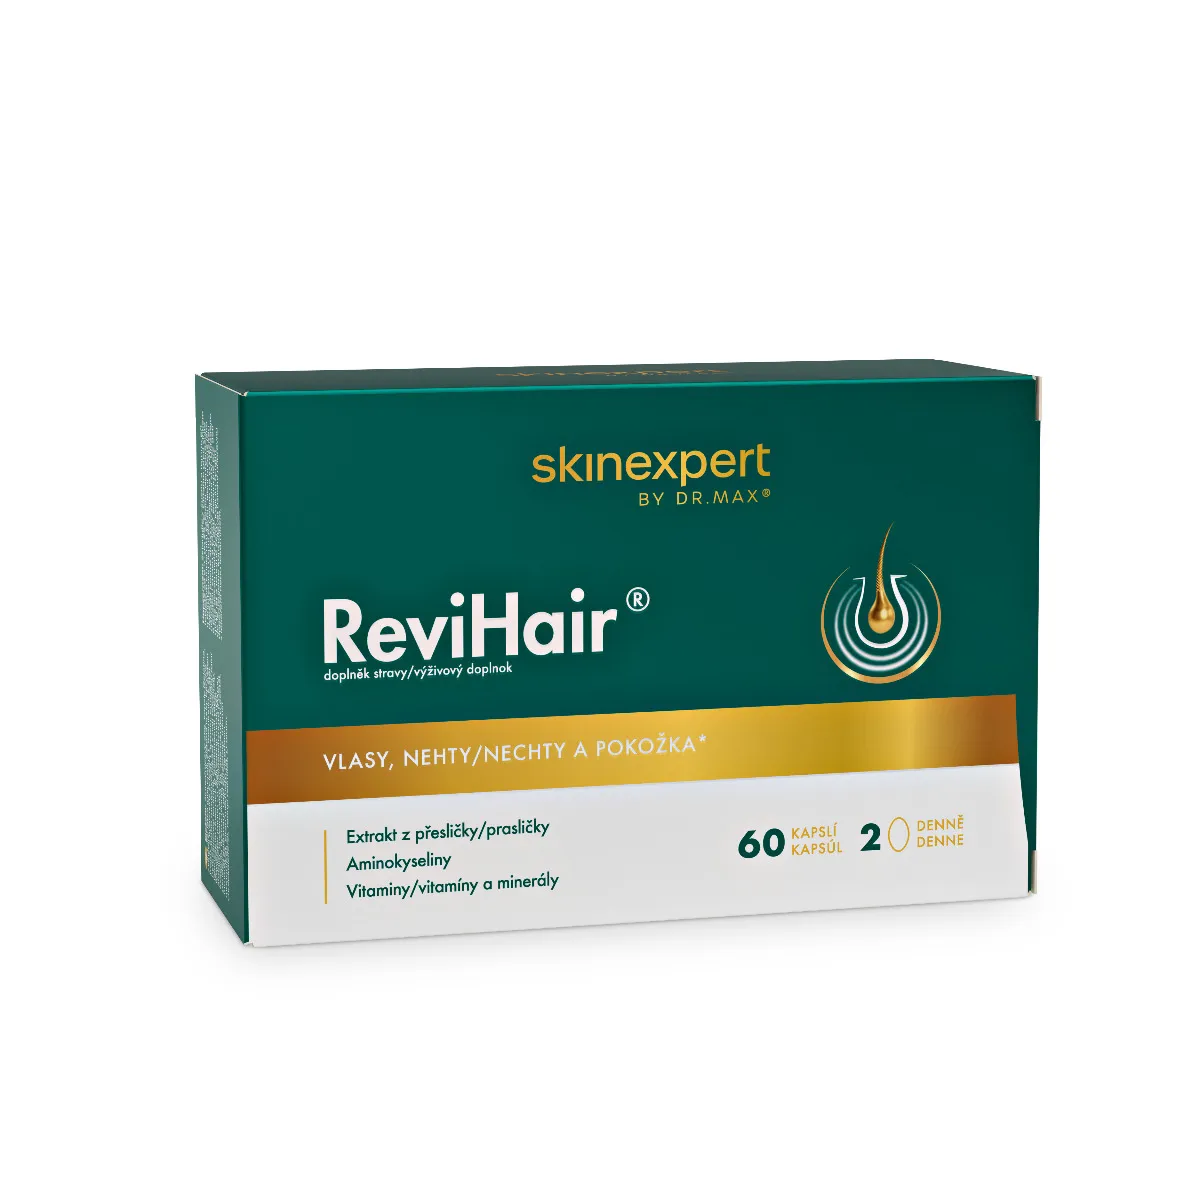 SKINEXPERT BY DR. MAX revihair